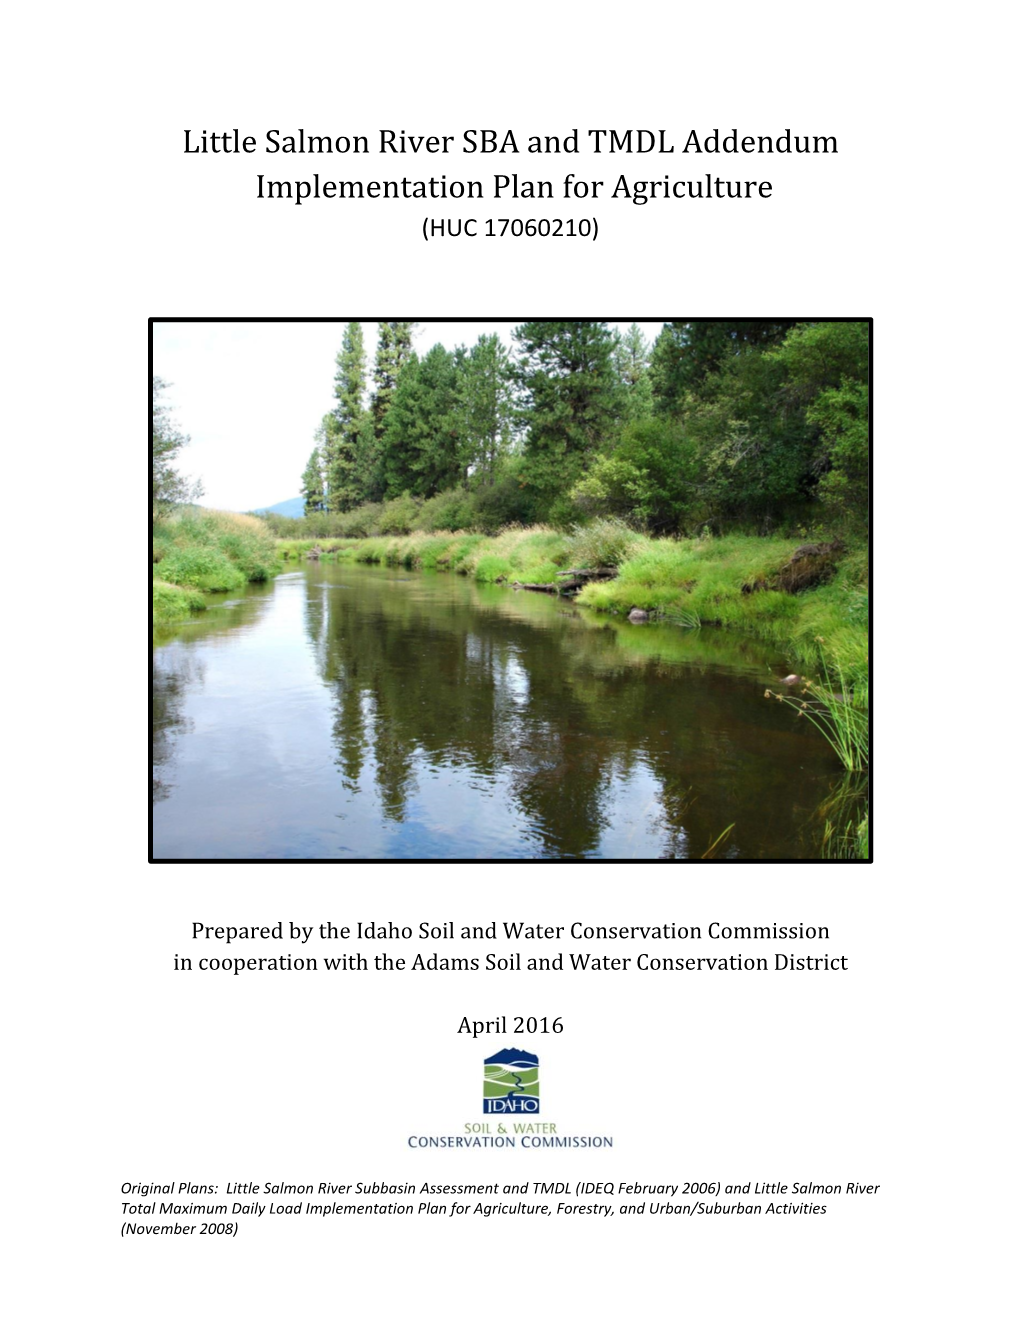 Little Salmon River SBA and TMDL Addendum Implementation Plan for Agriculture (HUC 17060210)